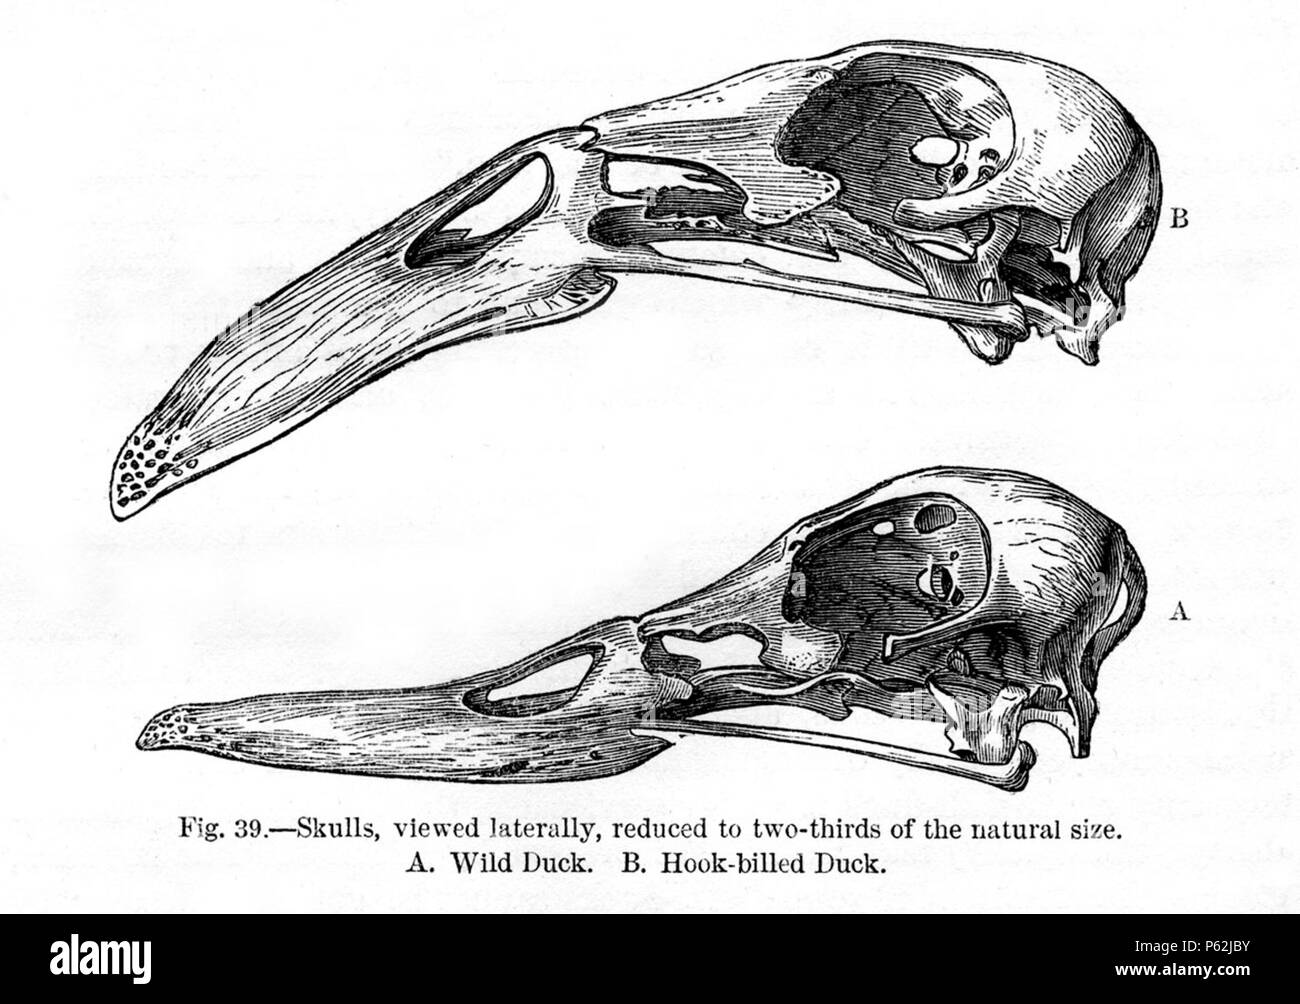 N/A. English: Figure 39 - 'Skull, viewed laterally, reduced to two-thirds of the natural size. A. Wild Duck. B. Hook-billed Duck.' from Charles Darwin's book Variation of Animals and Plants Under Domestication published in 1868. January 1868.   Charles Darwin  (1809–1882)       Alternative names Charles Robert Darwin  Description British naturalist and author  Date of birth/death 12 February 1809 19 April 1882  Location of birth/death The Mount, Shrewsbury Down House  Authority control  : Q1035 VIAF:27063124 ISNI:0000 0001 2125 1077 ULAN:500228559 LCCN:n78095637 NARA:10580367 WorldCat 413 Darw Stock Photo